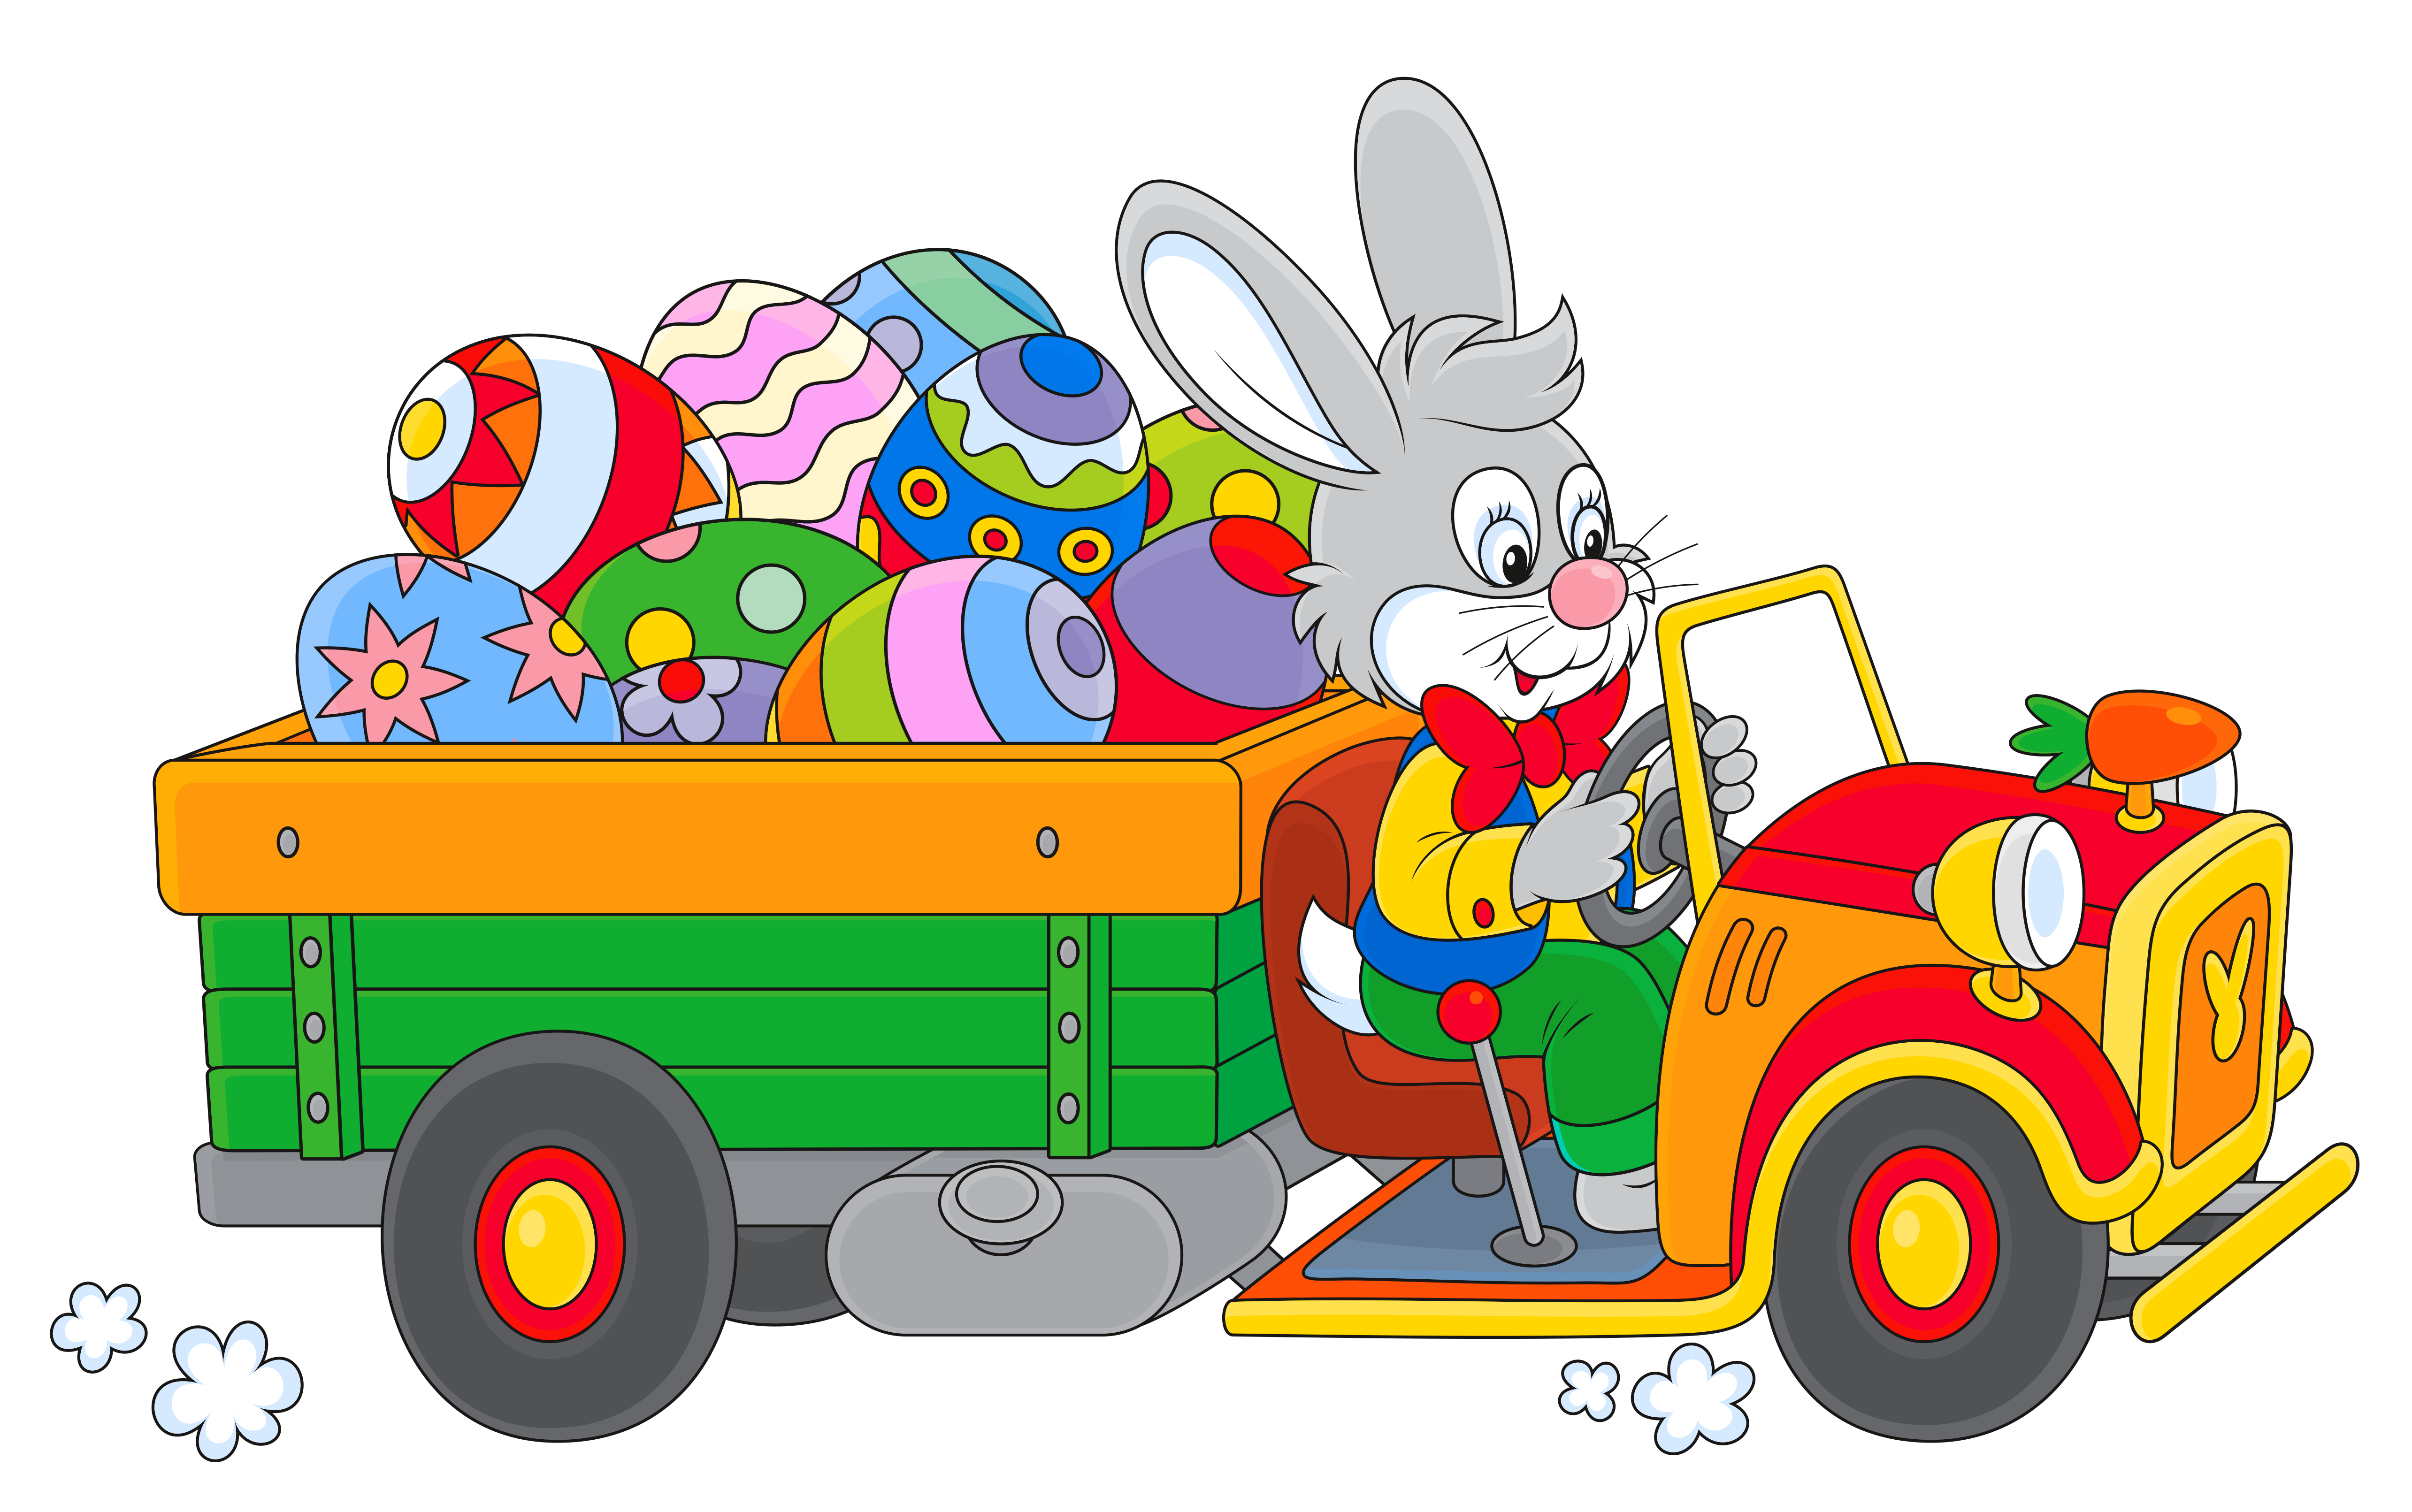 looky clipart,toy clipart,tomtom clipart,royaltyfree clipart,easter egg cli...